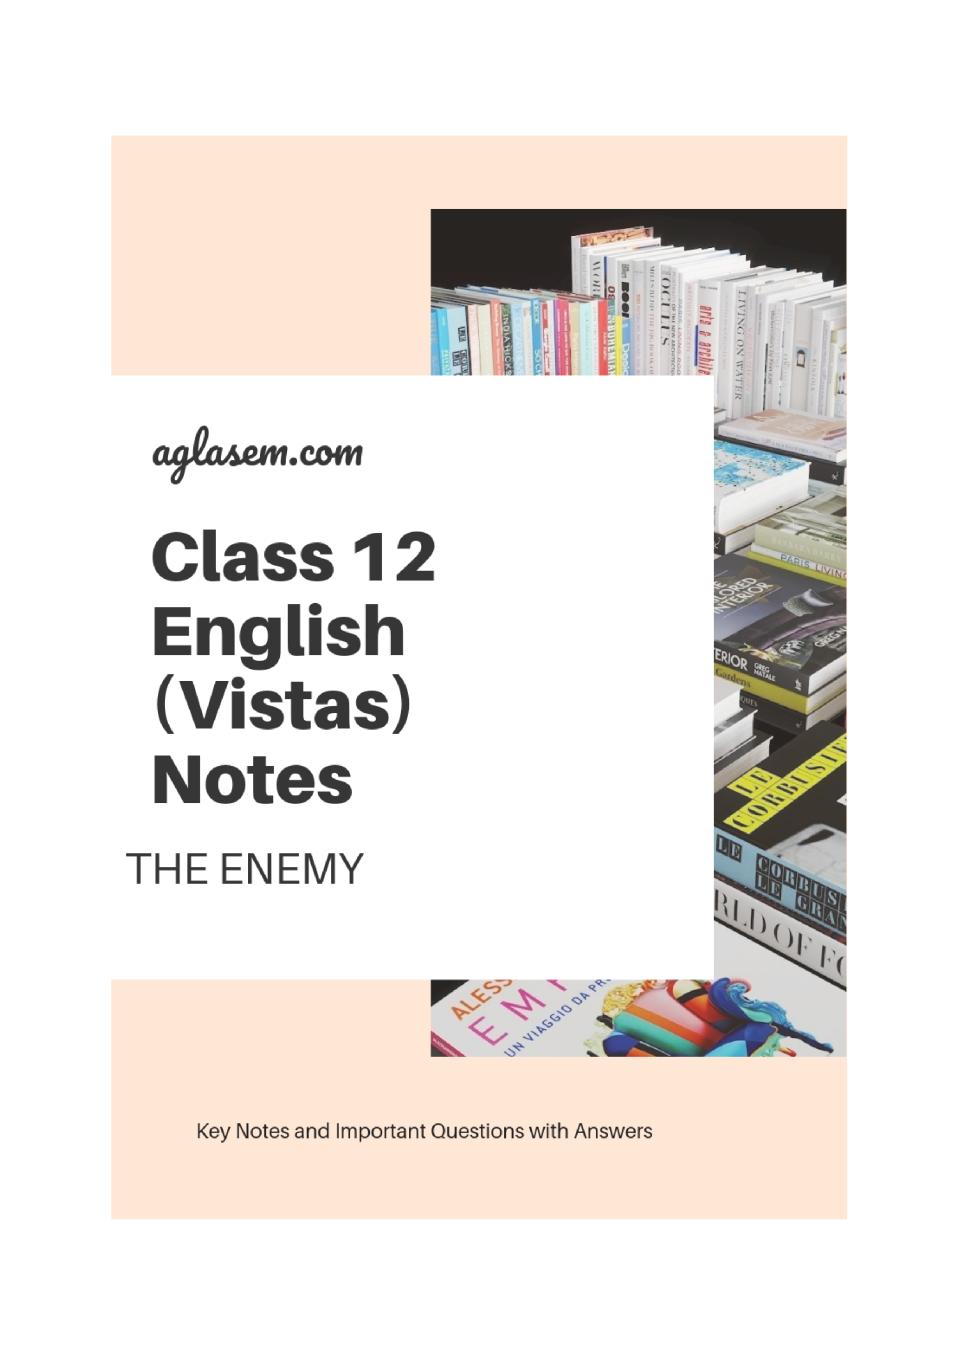 Class 12 English Vistas Notes For The Enemy - Page 1